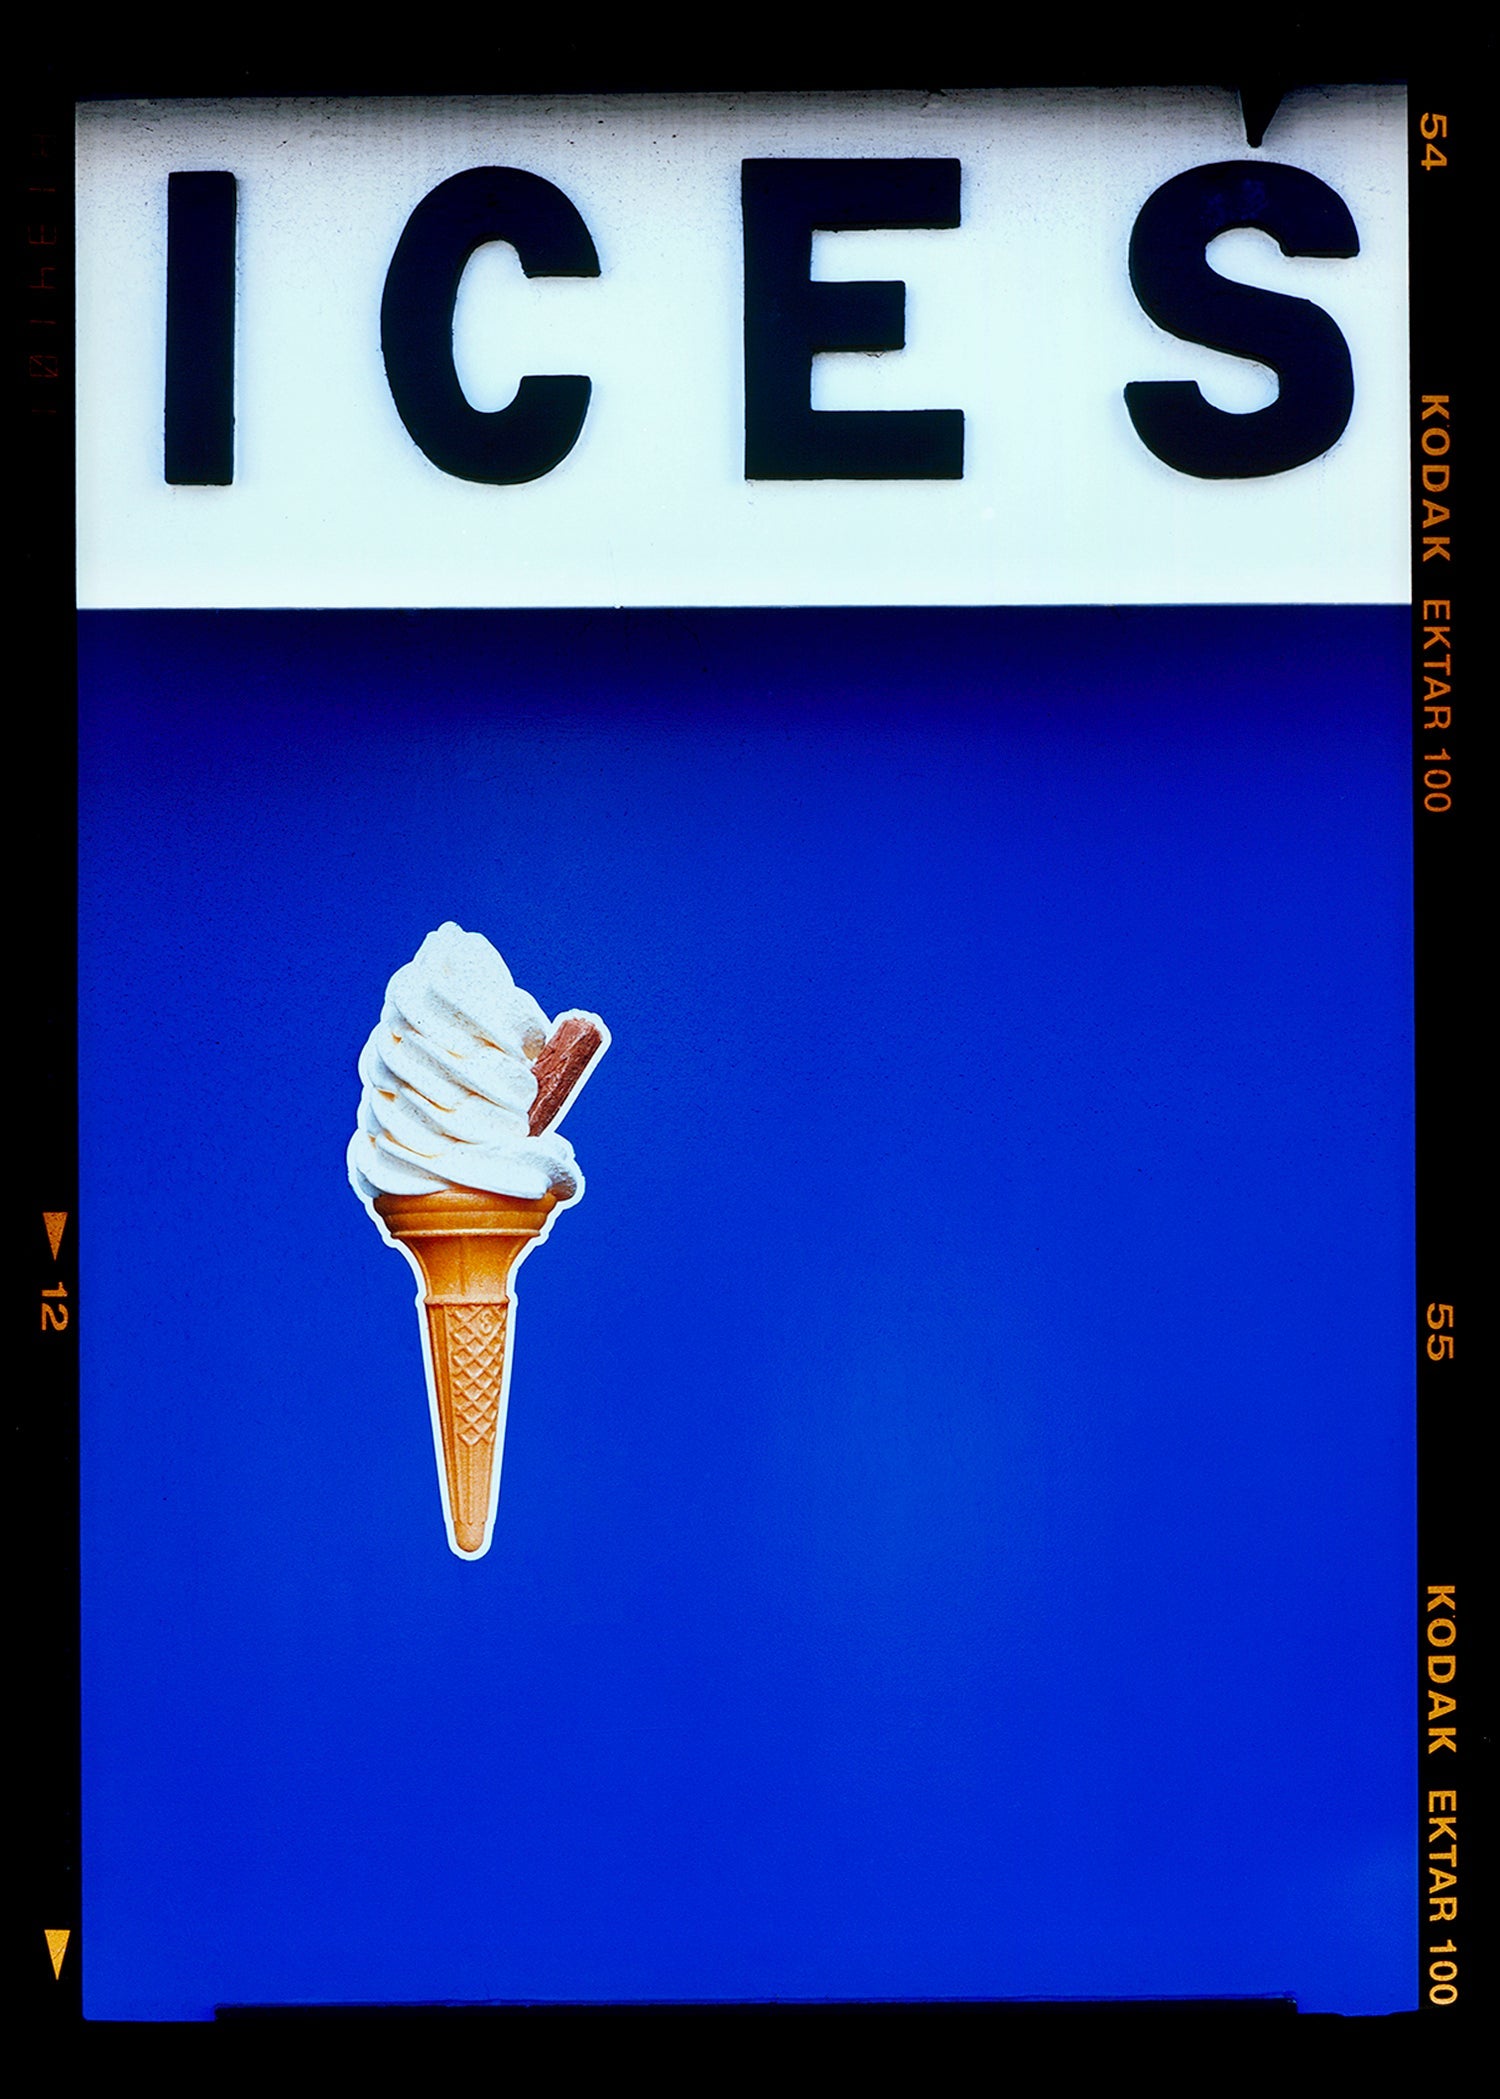 Photograph by Richard Heeps.  At the top black letters spell out ICES and below is depicted a classic ice cream cone with a flake sitting left of centre against a blue coloured background.  